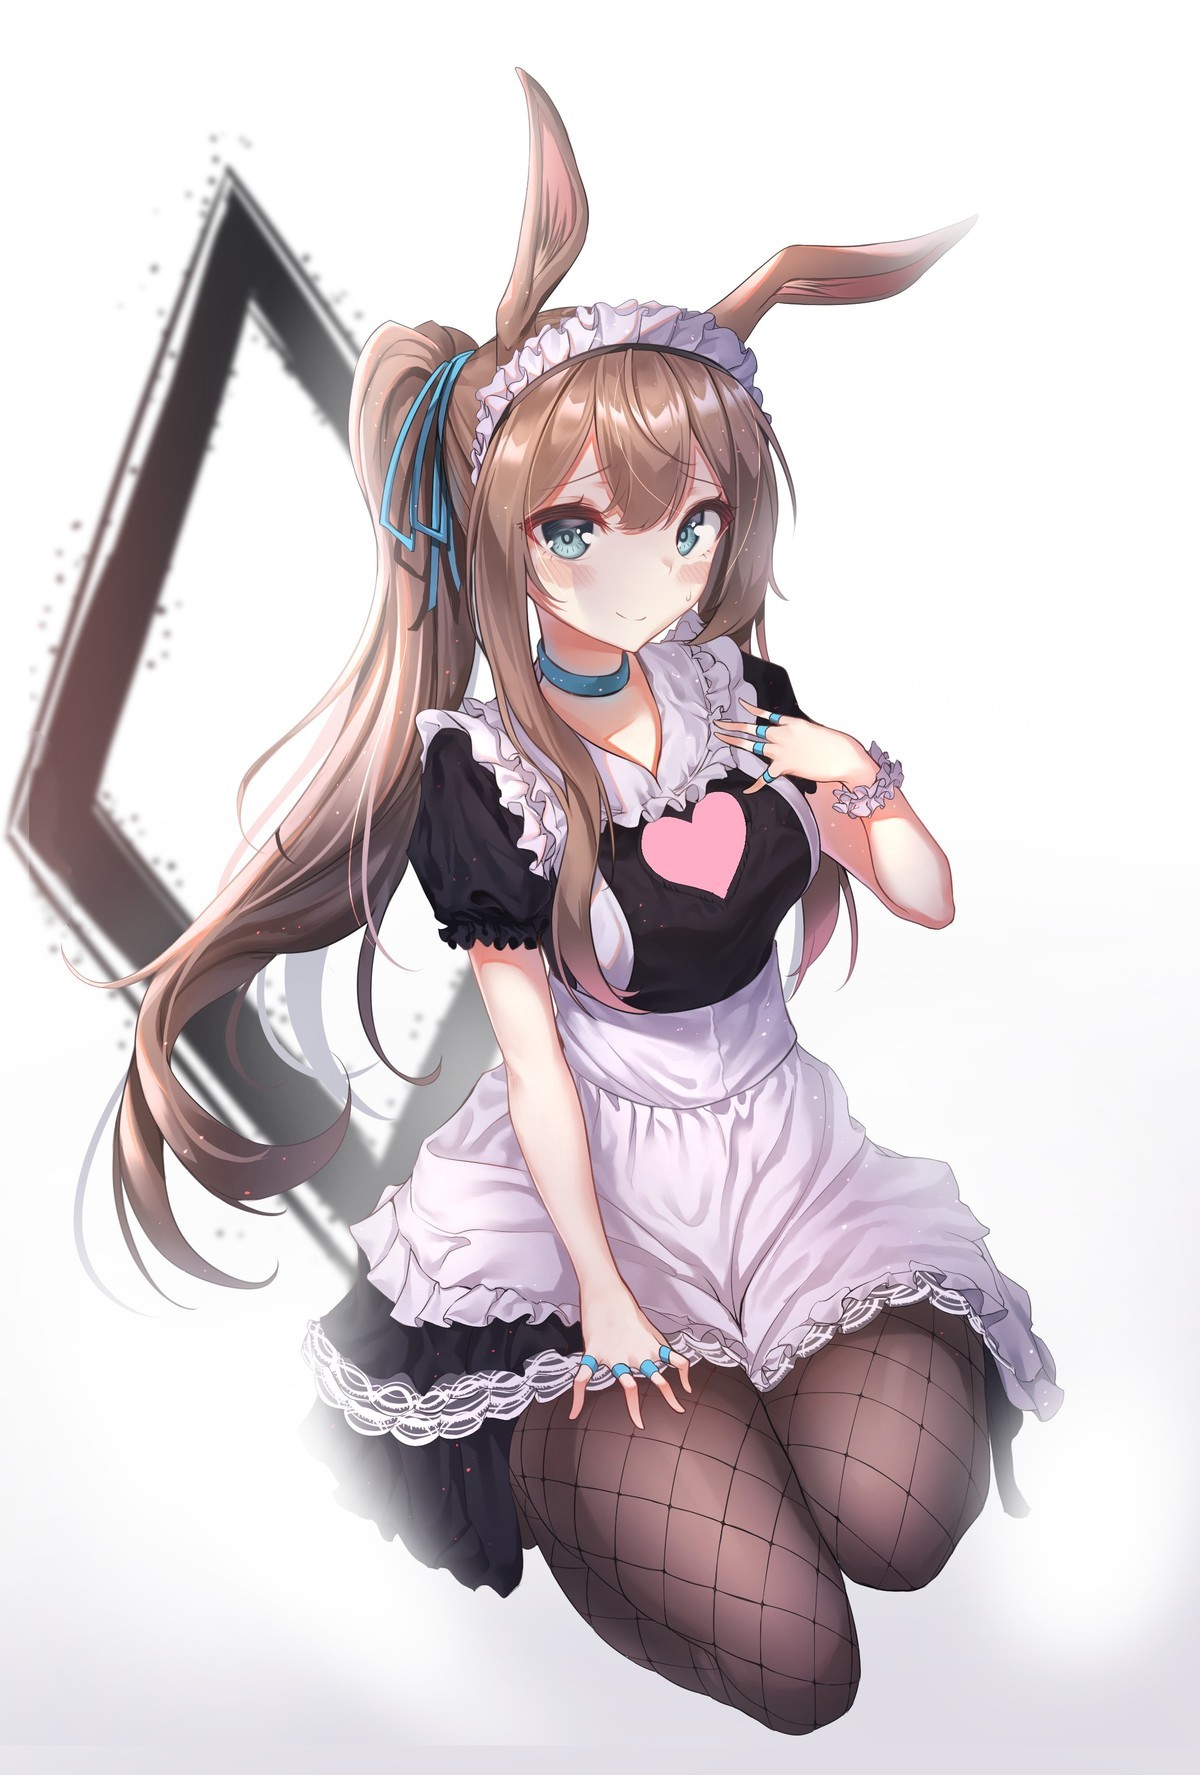 Donkey Maid. join list: SplendidServants (565 subs)Mention History join list:. POV: you called the cute bunny a donkey again